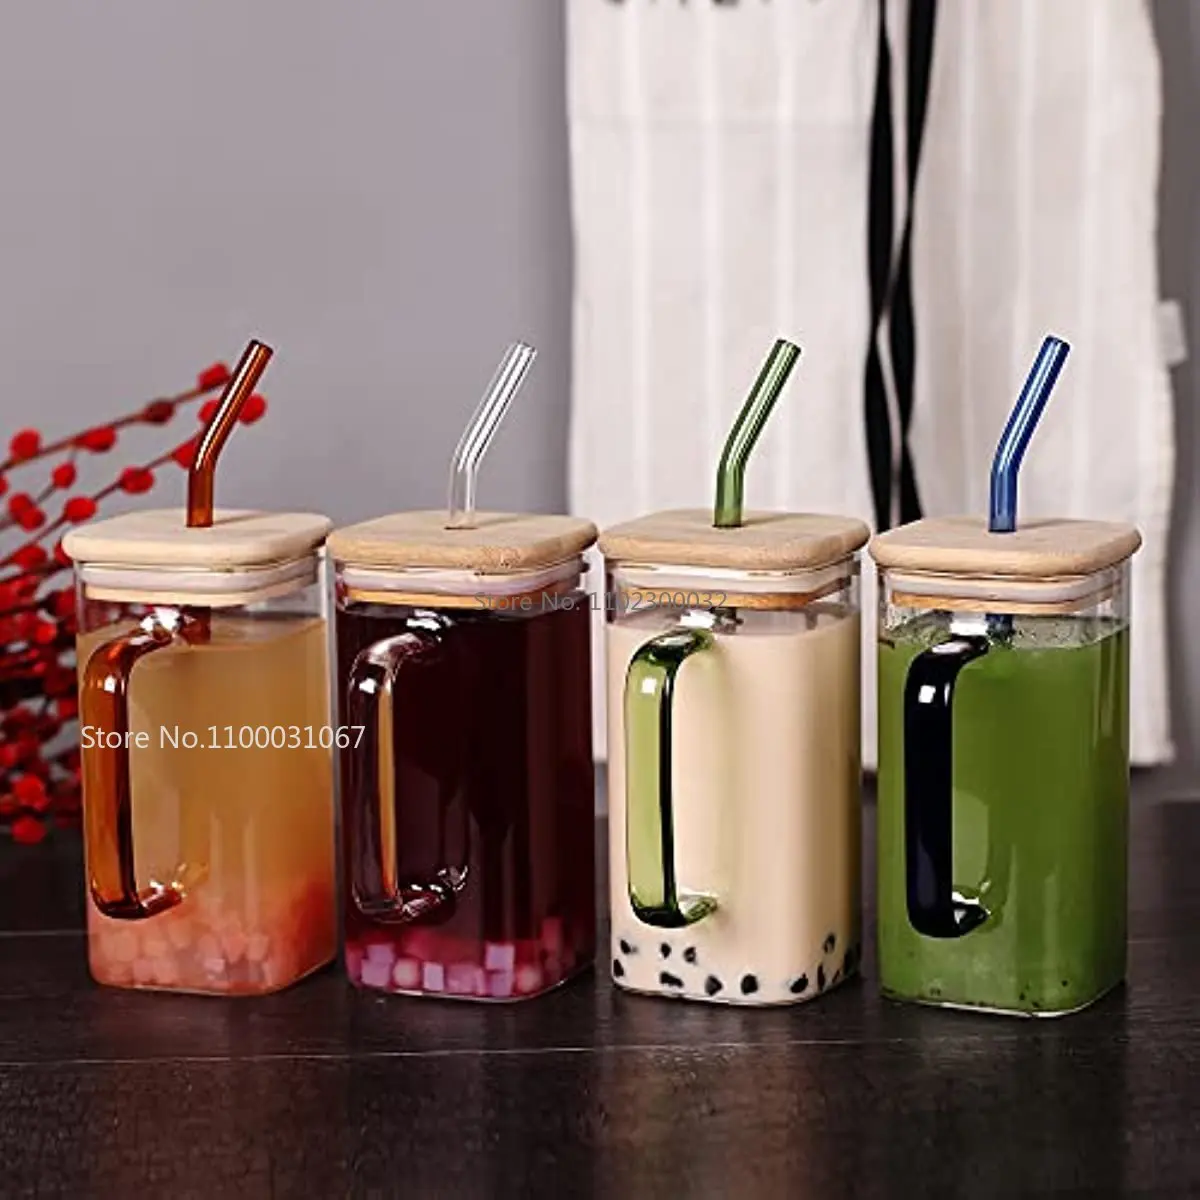 https://ae01.alicdn.com/kf/S5afbd137fedf4069b60d431b68cc2c88Q/350-600ML-Heat-Resistant-Square-Glass-with-Lids-and-Straws-Iced-Coffee-Milk-Bubble-Tea-Water.jpg